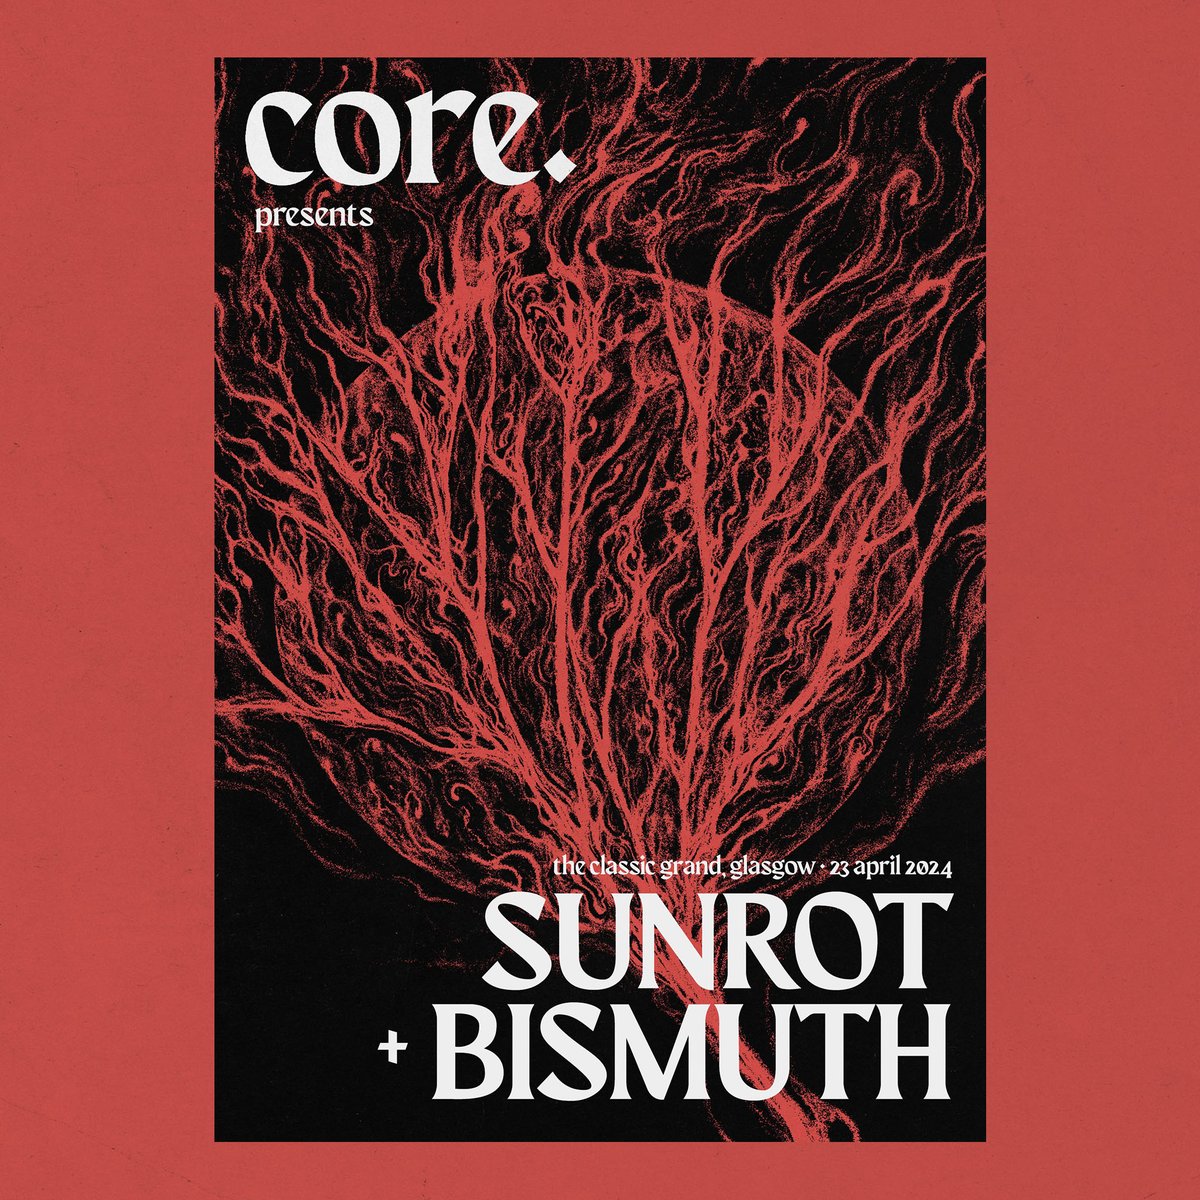 JUST ANNOUNCED! NJ Sludge outfit @SunrotMusic and Nottingham Doom duo @bismuthslow team up for a heavy one at @ClassicGrand, Glasgow on 23 April 🔥 Tickets HERE ----> bit.ly/49ecHOL 🎟 Presented by @corethefestival - Glasgow's newest Celebration of Noise 🤘